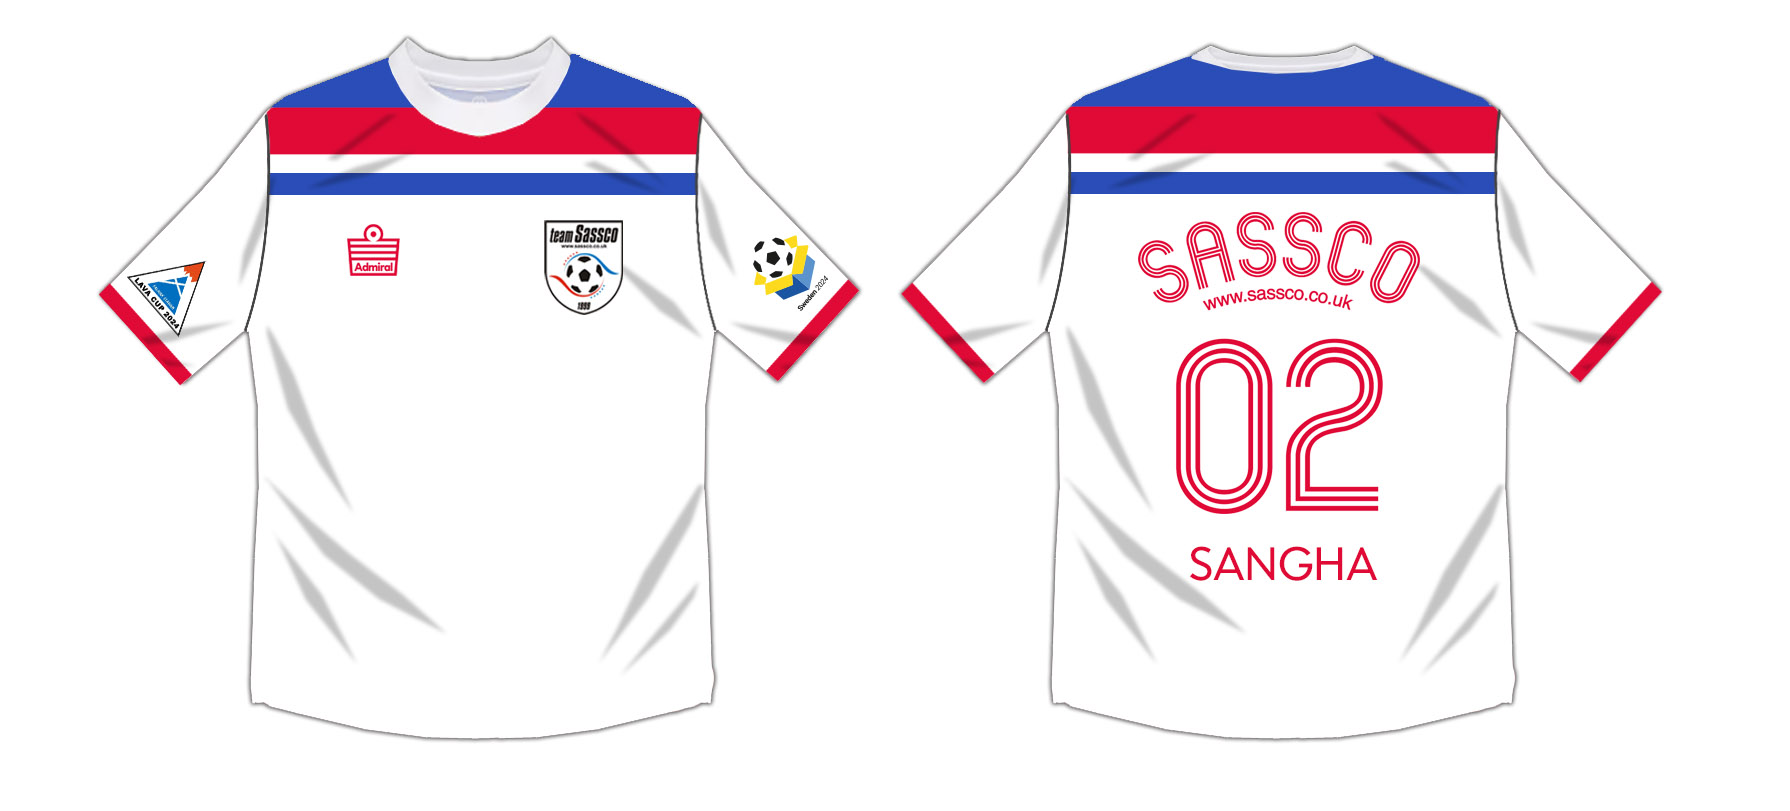 Admiral “England” shirt for the Sweden Tour and Lava Cup participation